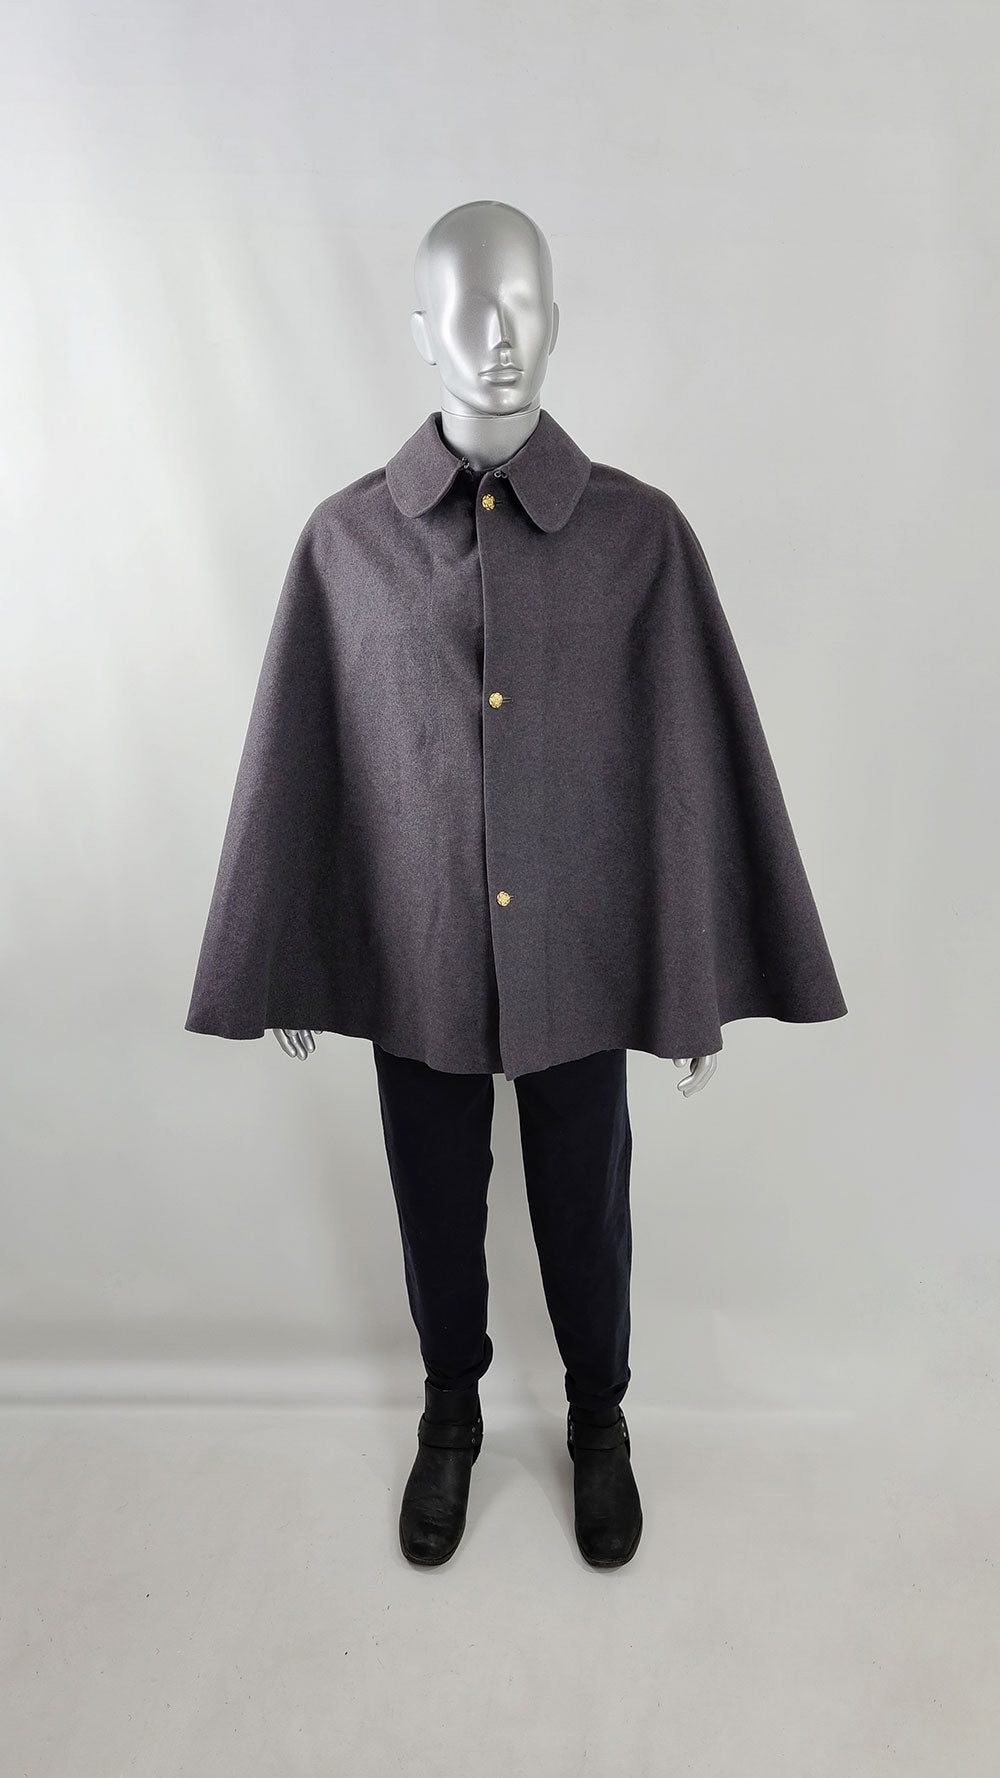 A vintage 1960s mens grey wool cape / cloak with gold buttons.